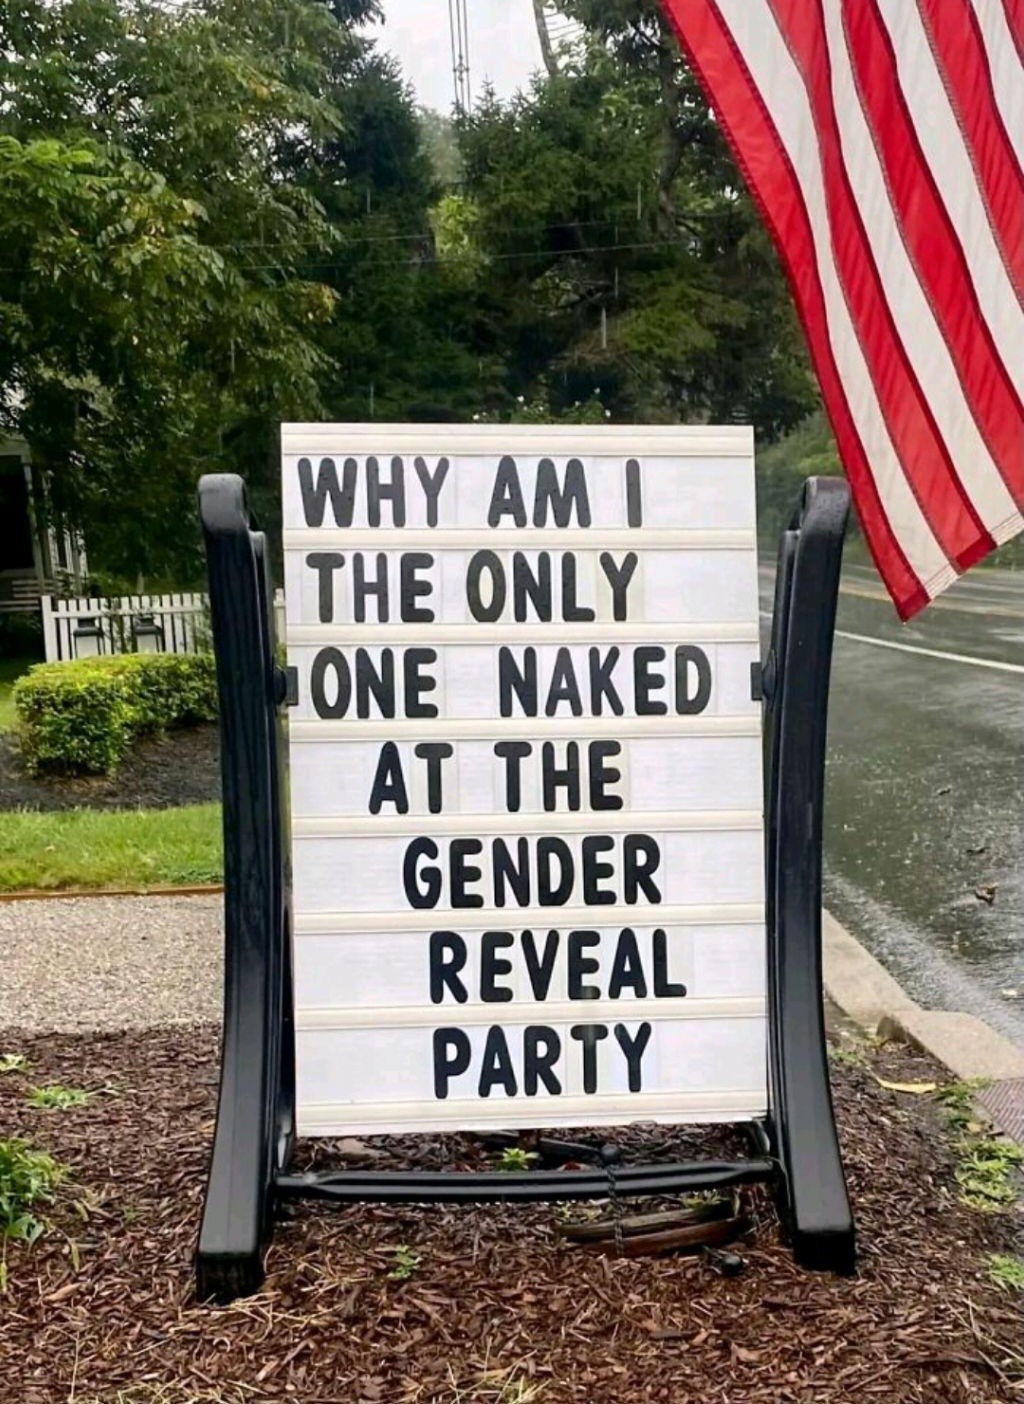 Changeable letter board saying "why am I the only one naked at the gender reveal party"